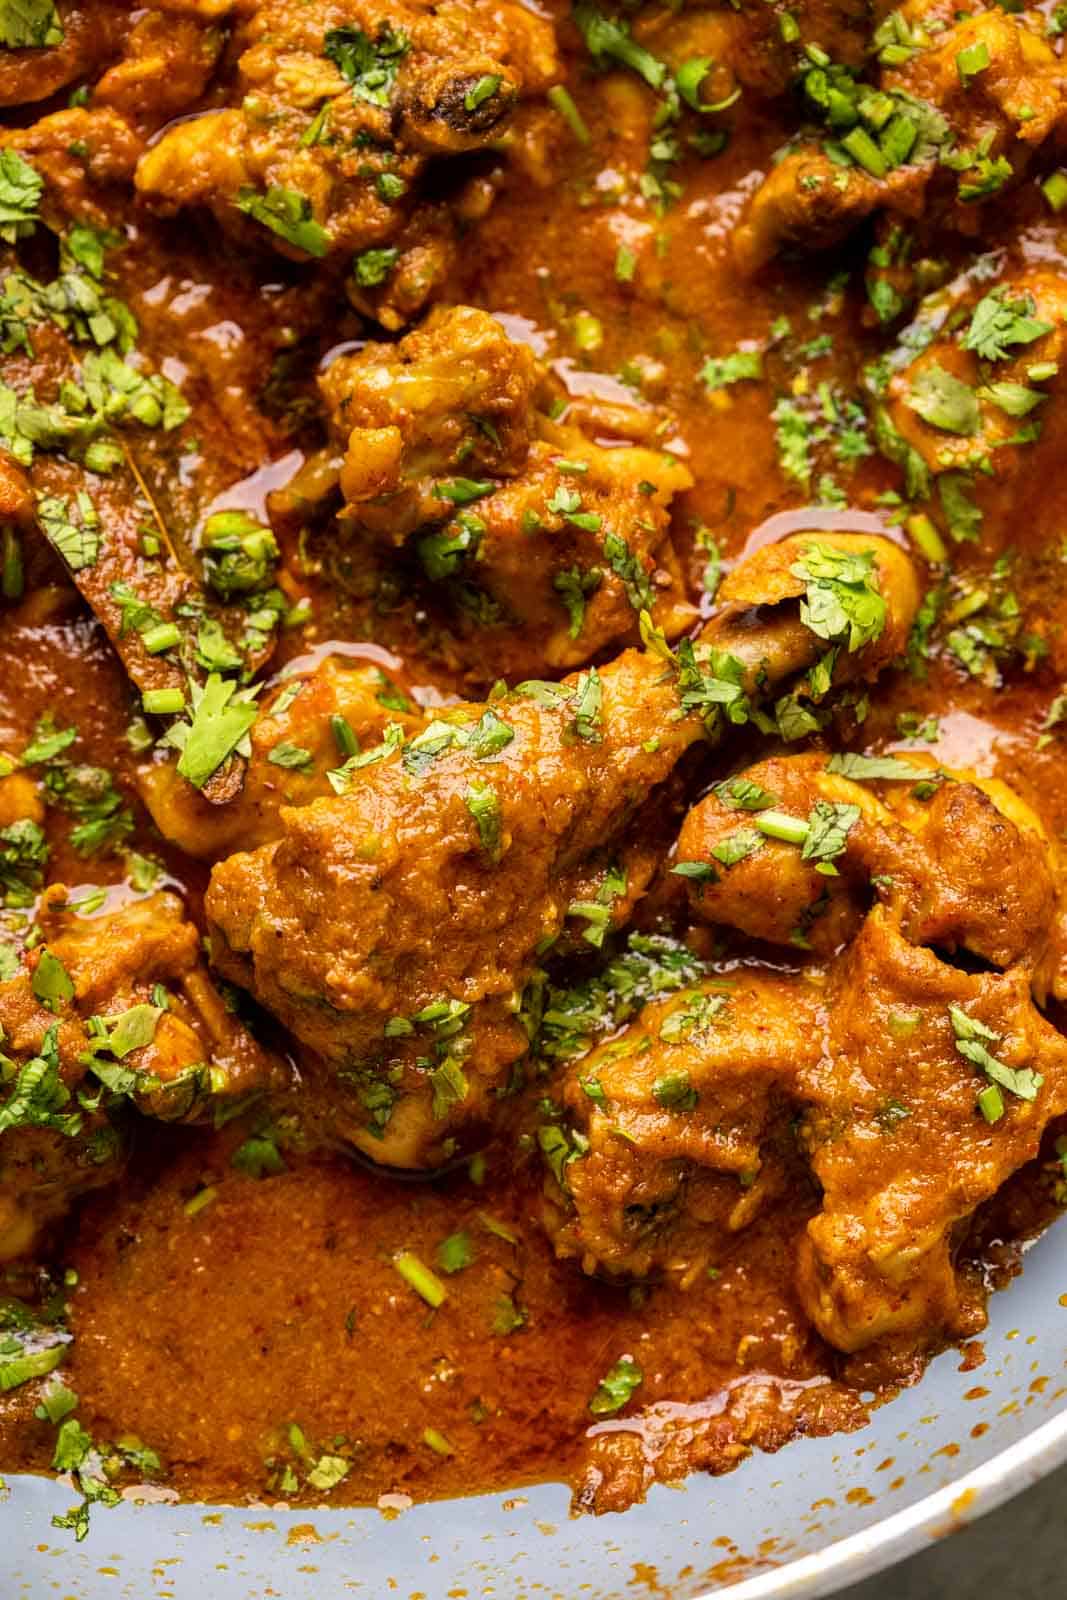 Close up of chicken curry to show texture of the gravy and succulent, juicy pieces of chicken